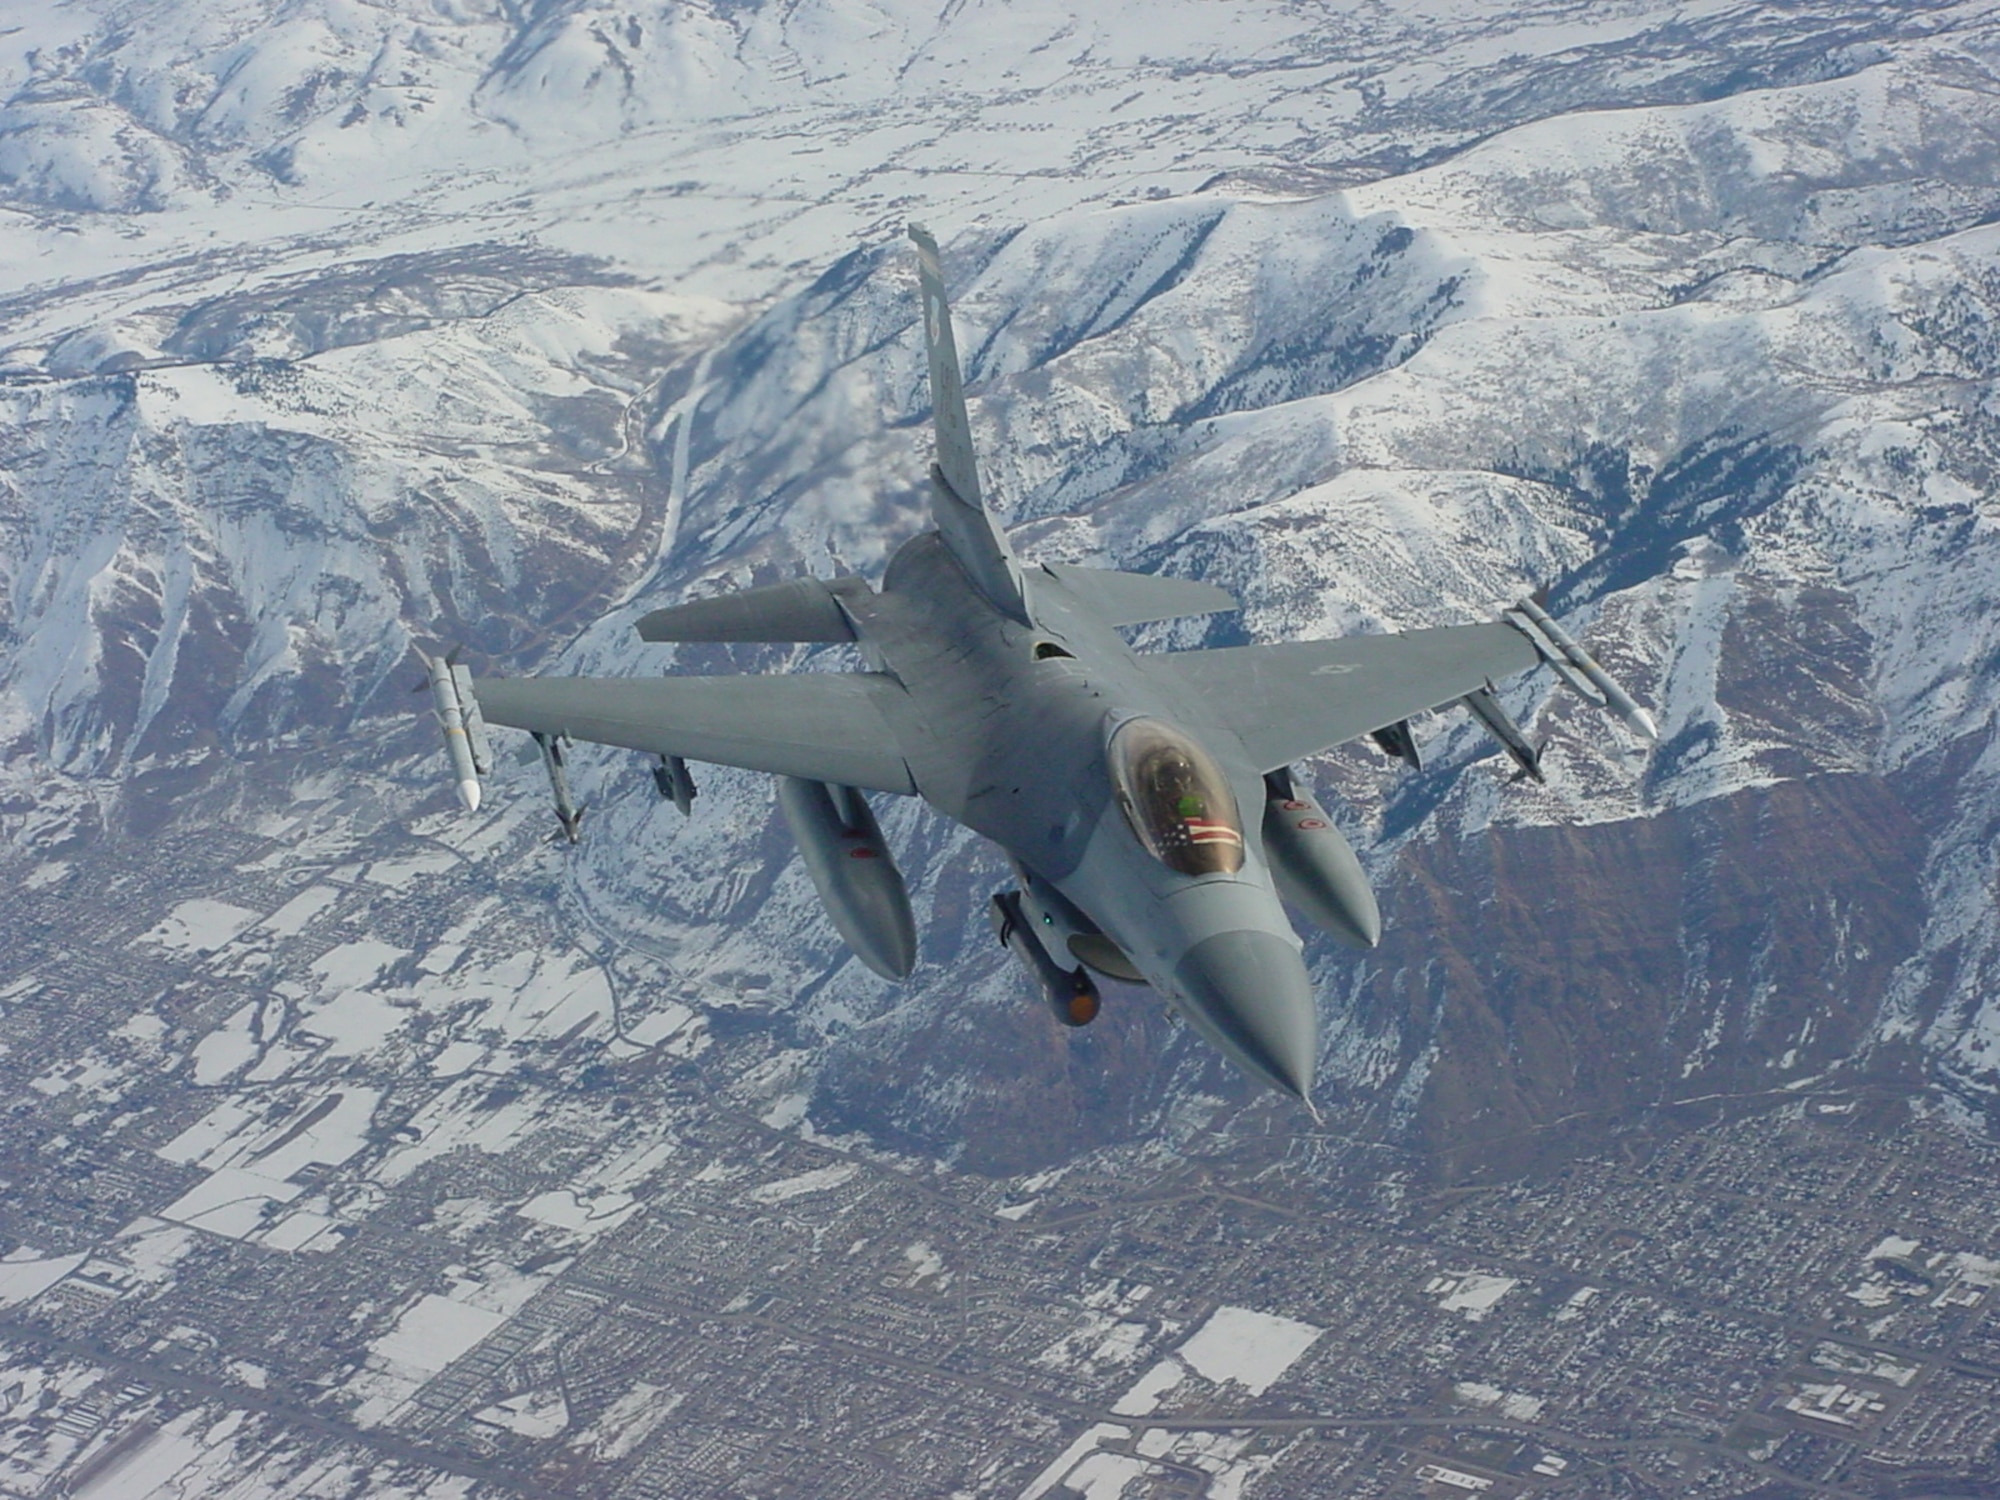 An F-16 flies over Salt Lake City as part of Operation Noble Eagle security for the 2002 Winter Olympic Games. The 388th Fighter Wing provided aerial security for all the XIX Olympics venues along the Wasatch Mountain Range in northern Utah.